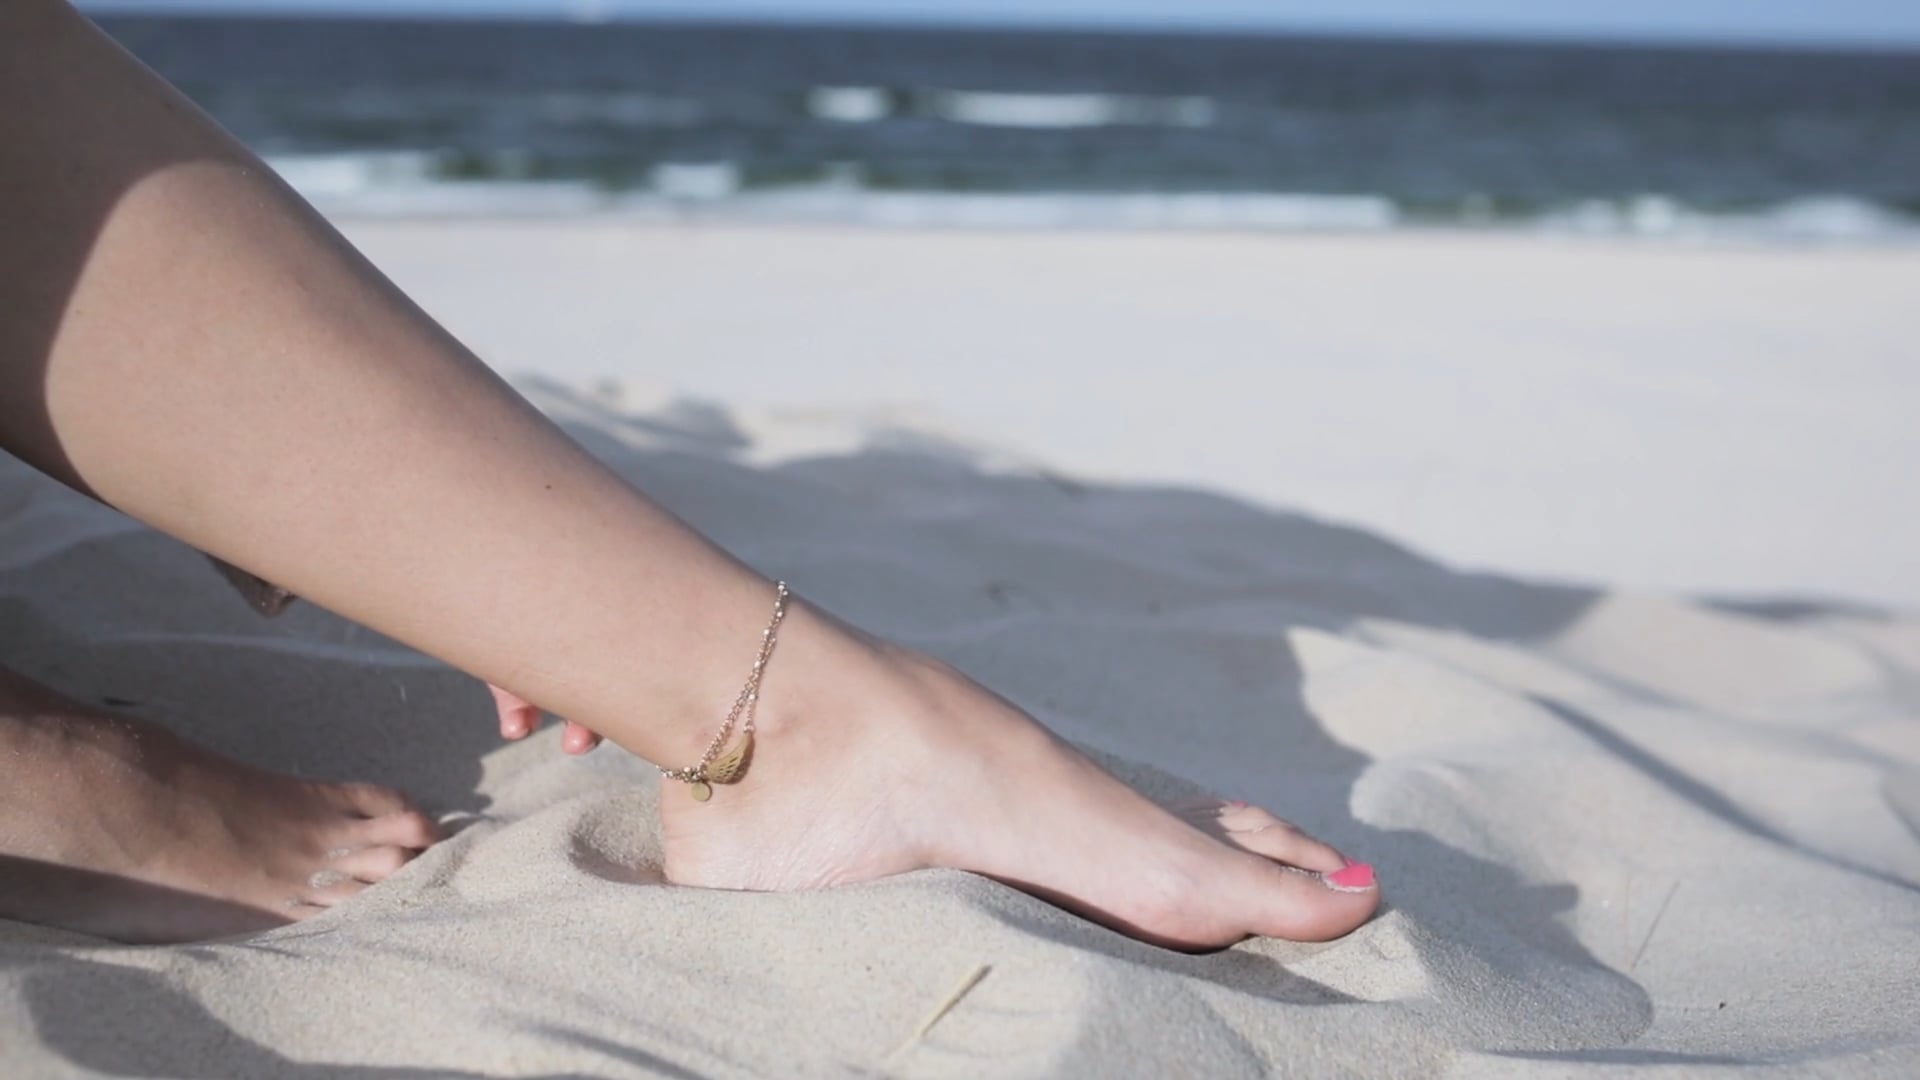 Anklet stock video, Touching anklet, Footwear fashion, Sensory experience, 1920x1080 Full HD Desktop